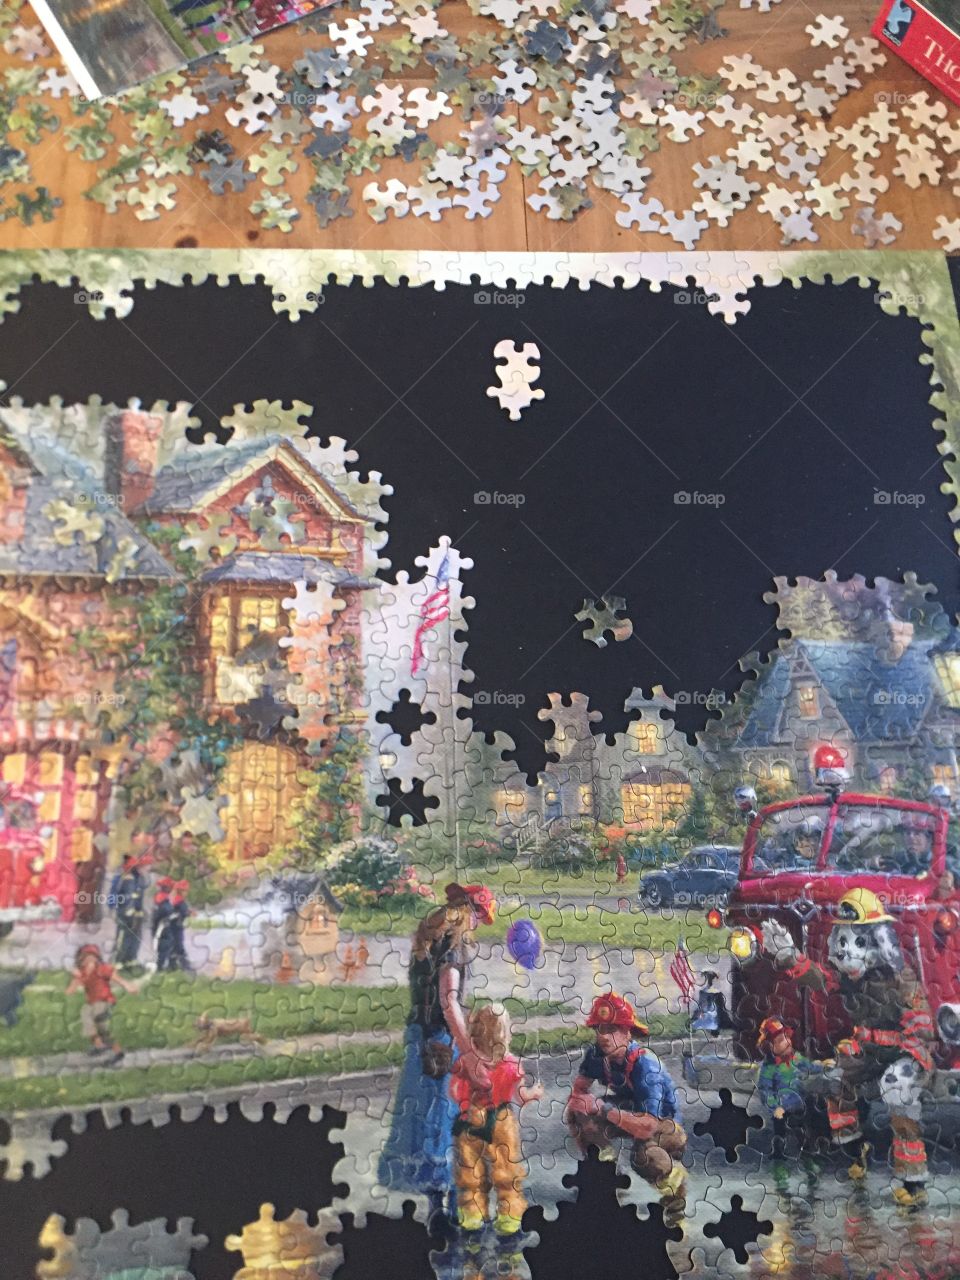 The project 1000 pieces a lot of hours each piece you add reveals a new piece to the picture.